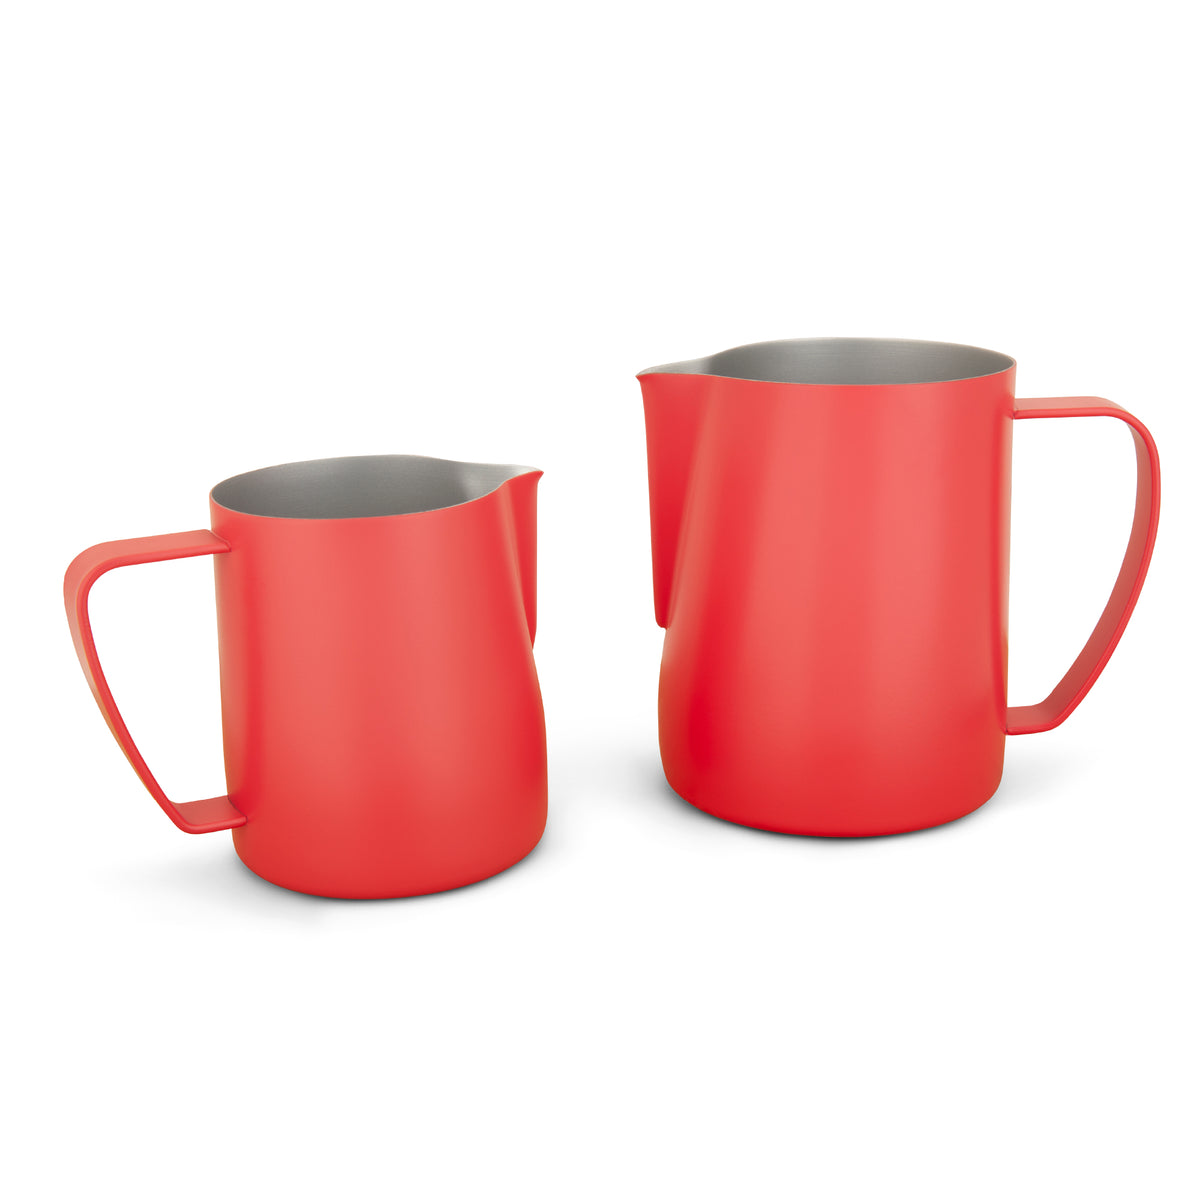 EspressoWorks Stainless Steel Milk Frothing Jug - Matte Red (350ml and 600ml)